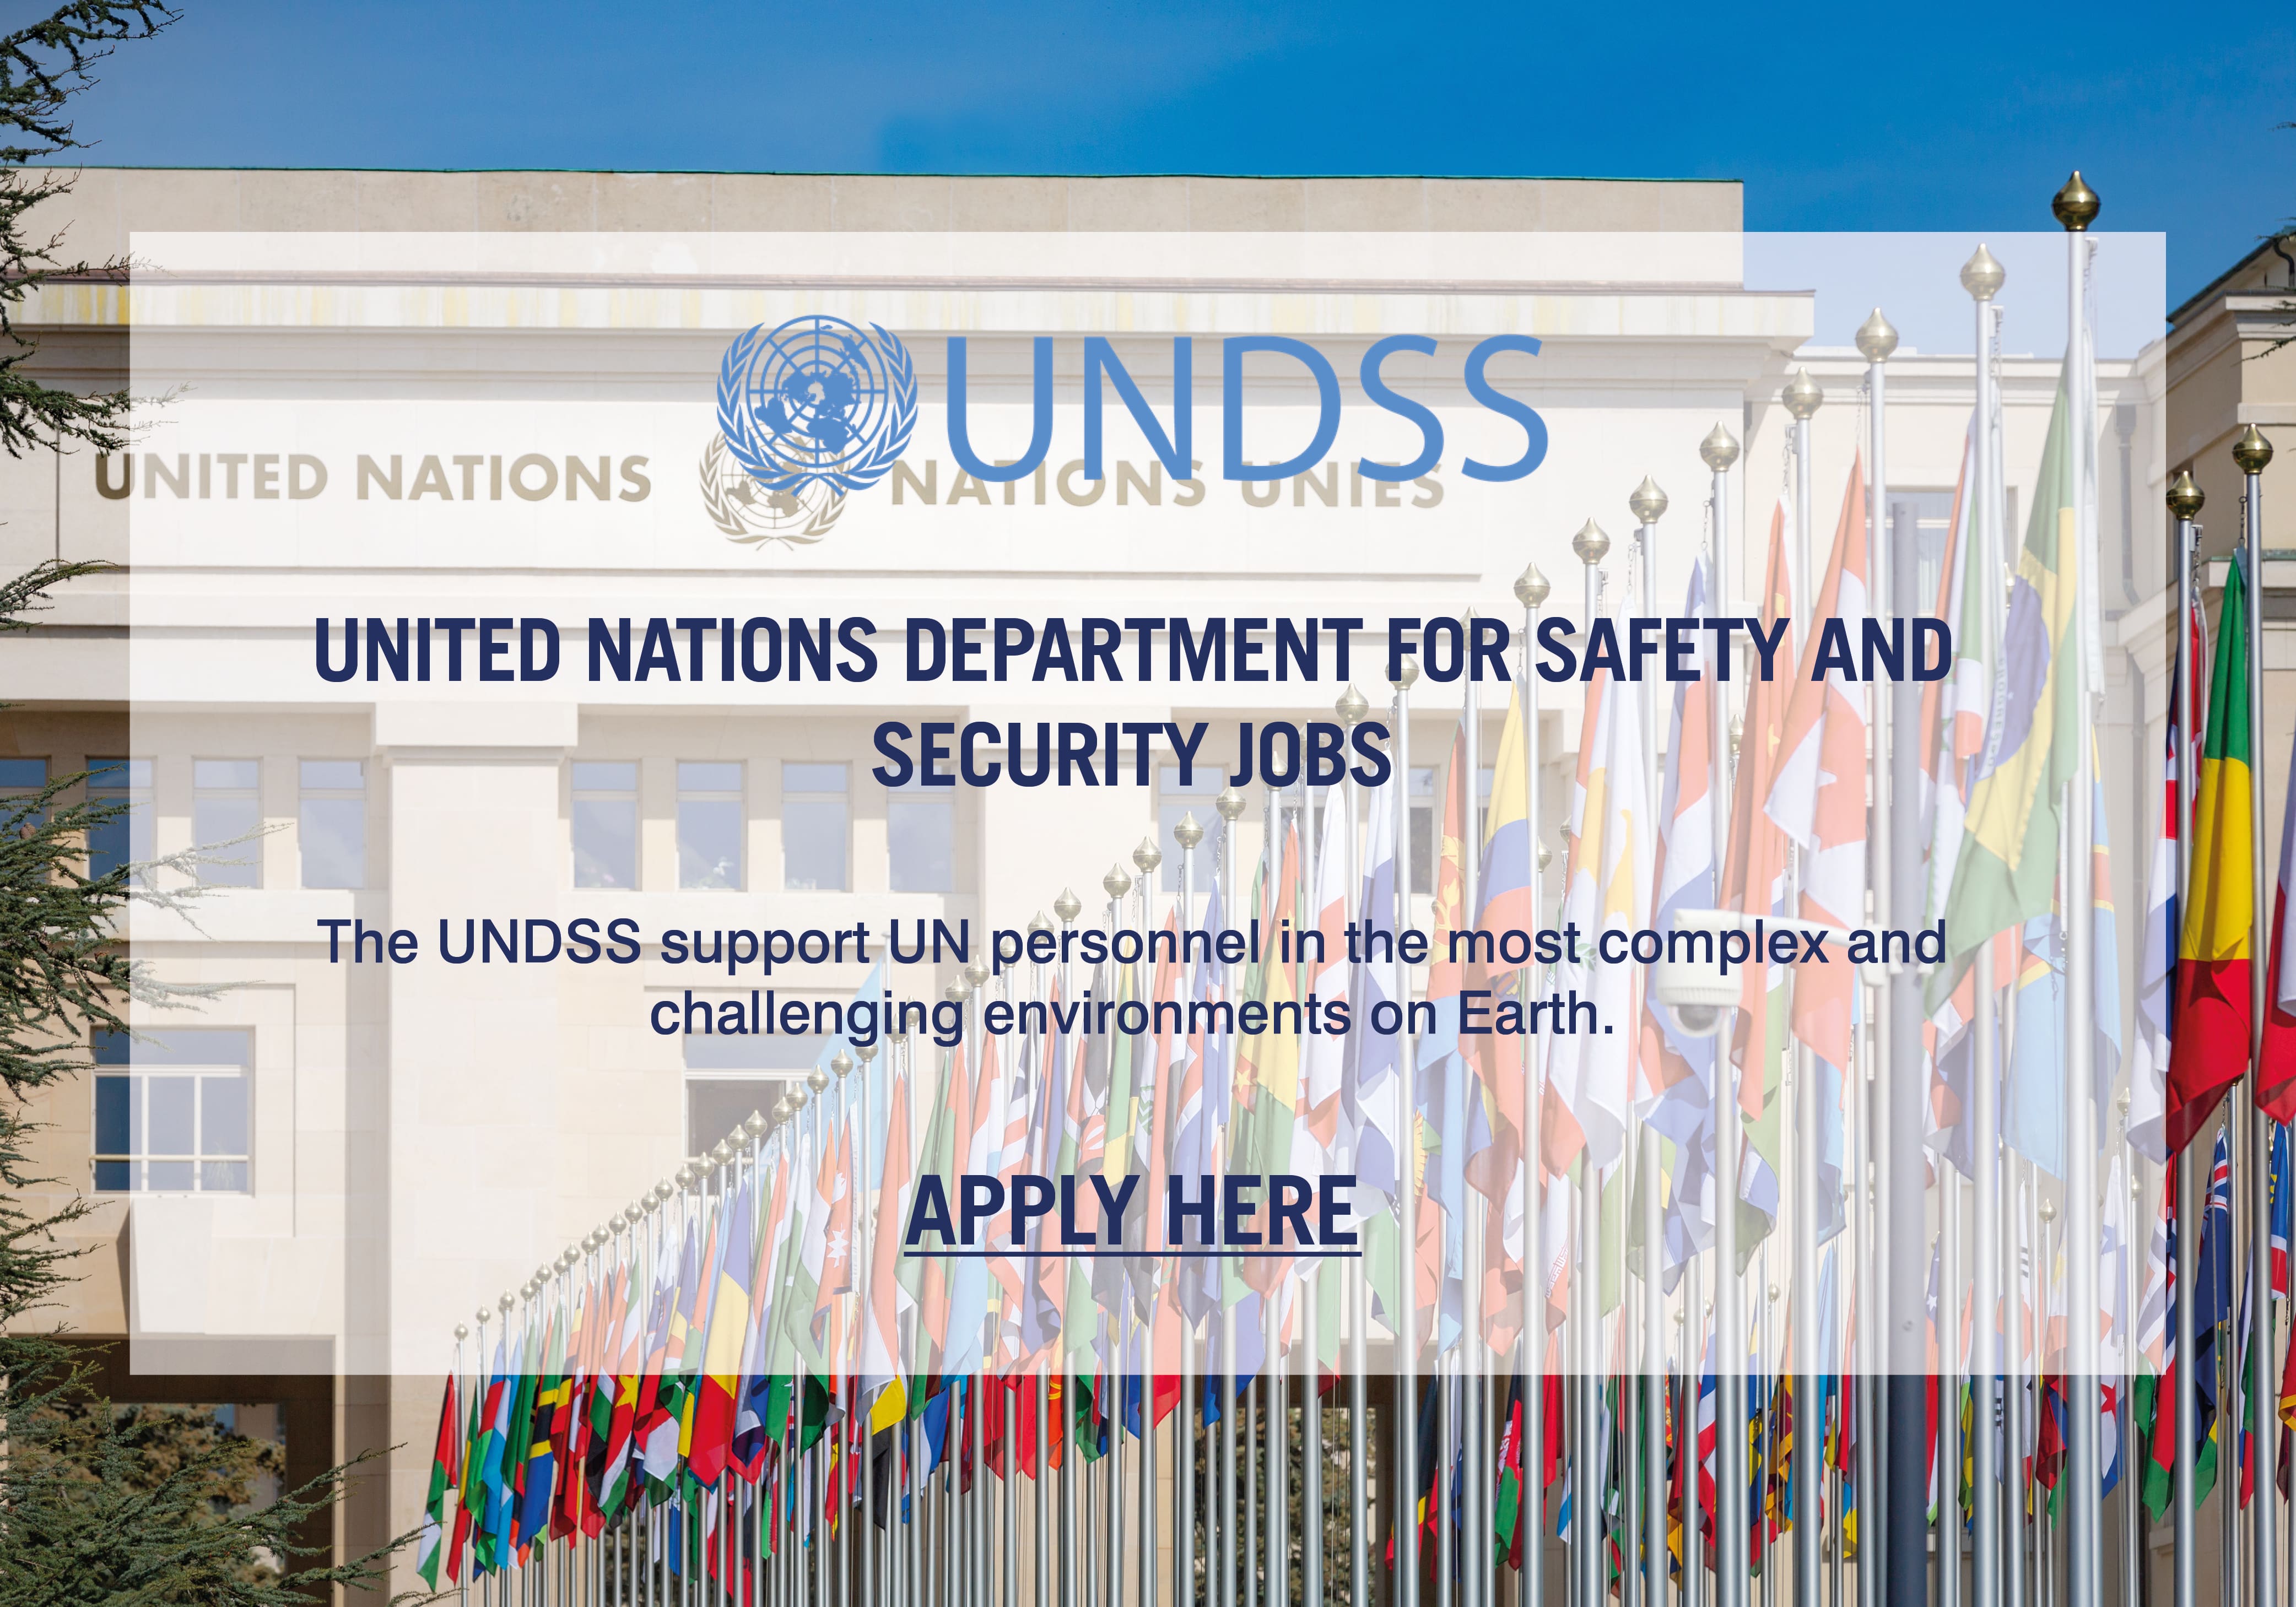 United Nations Department for Safety and Security Jobs